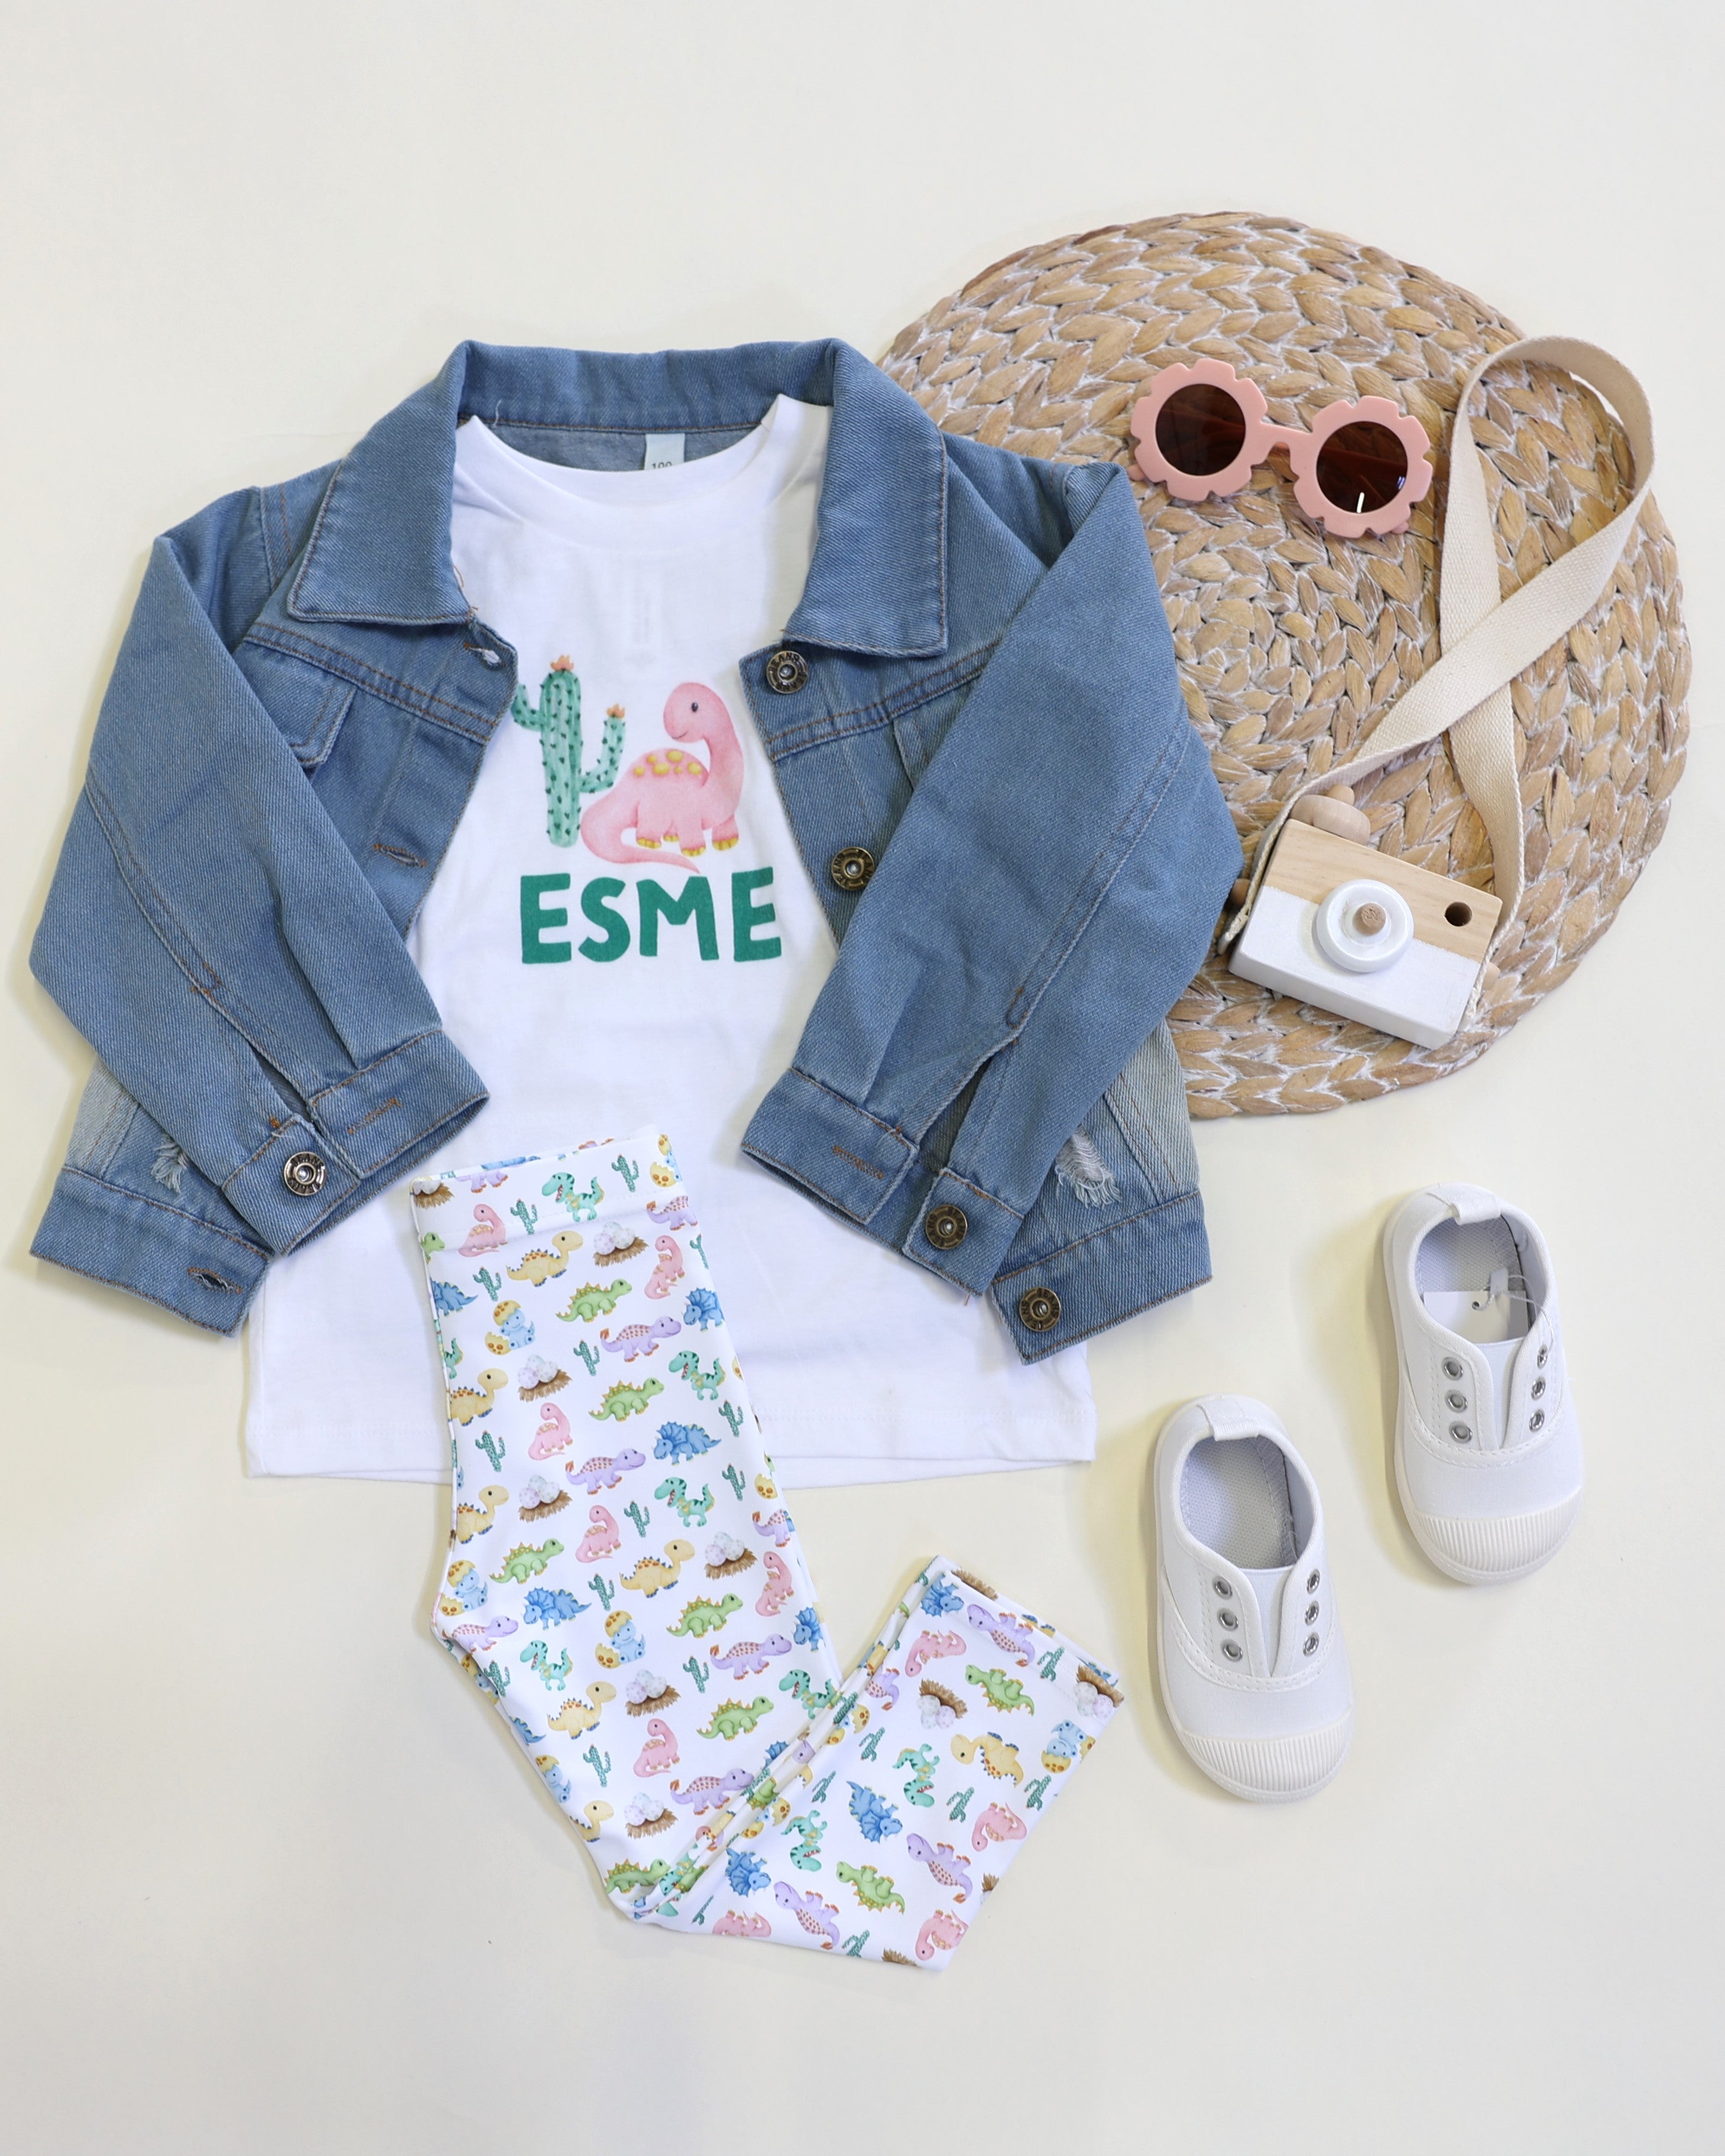 outfits for kids with personalized shirts and leggings